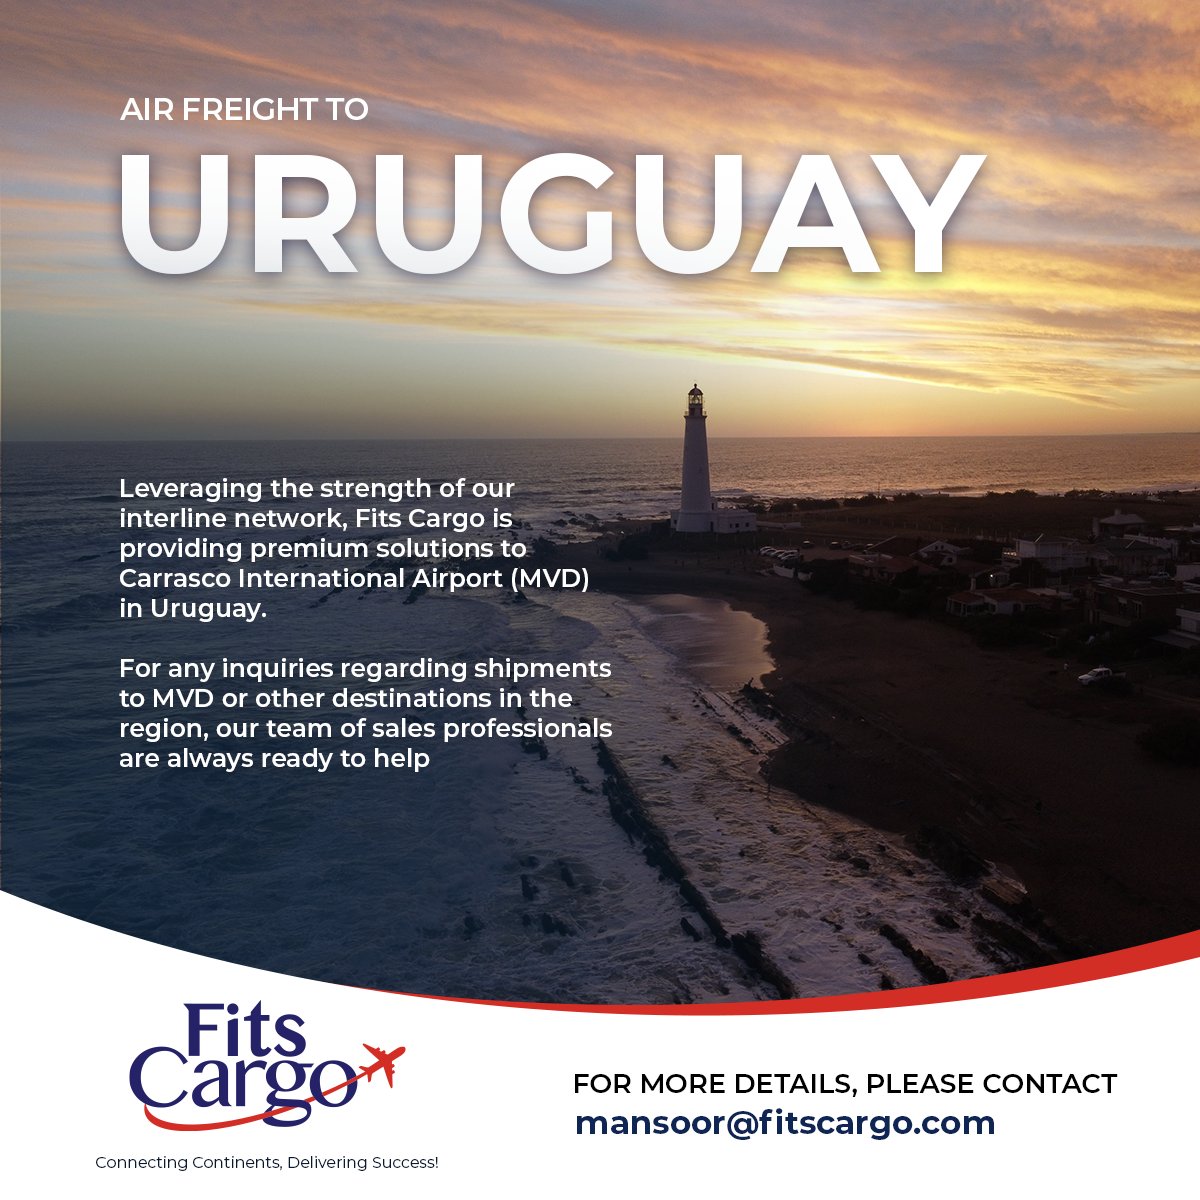 For any Air export shipments from BOM, COK or GOI to Carrasco International Airport (MVD), Montevideo, Uruguay, please feel free to contact me on mansoor@fitscargo.com #Aircargo #Export #Airfreight #import #logistics #Freightforwarding #Supplychain #Pharma #Chemicals #dgcargo